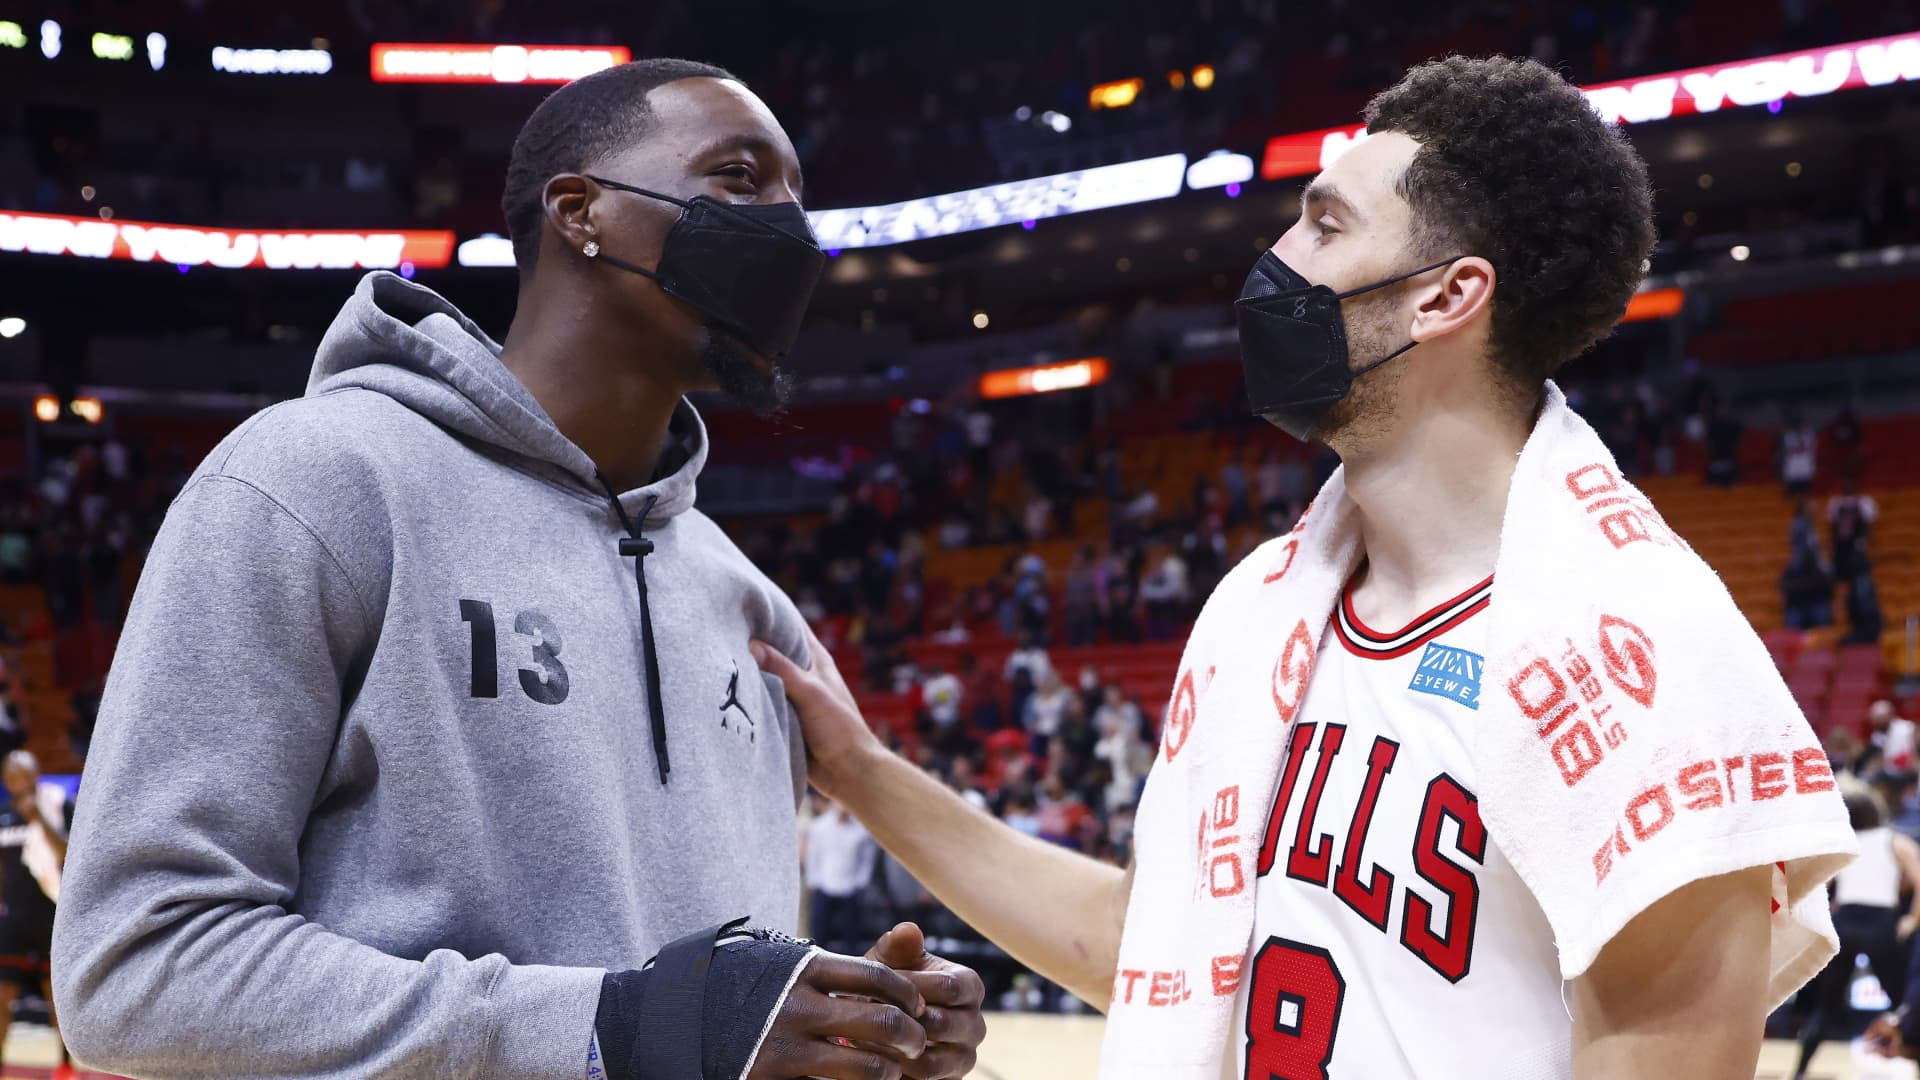 Bam Adebayo #13 of the Miami Heat greets Zach LaVine #8 of the Chicago Bulls after the game at FTX Arena on December 11, 2021 in Miami, Florida.